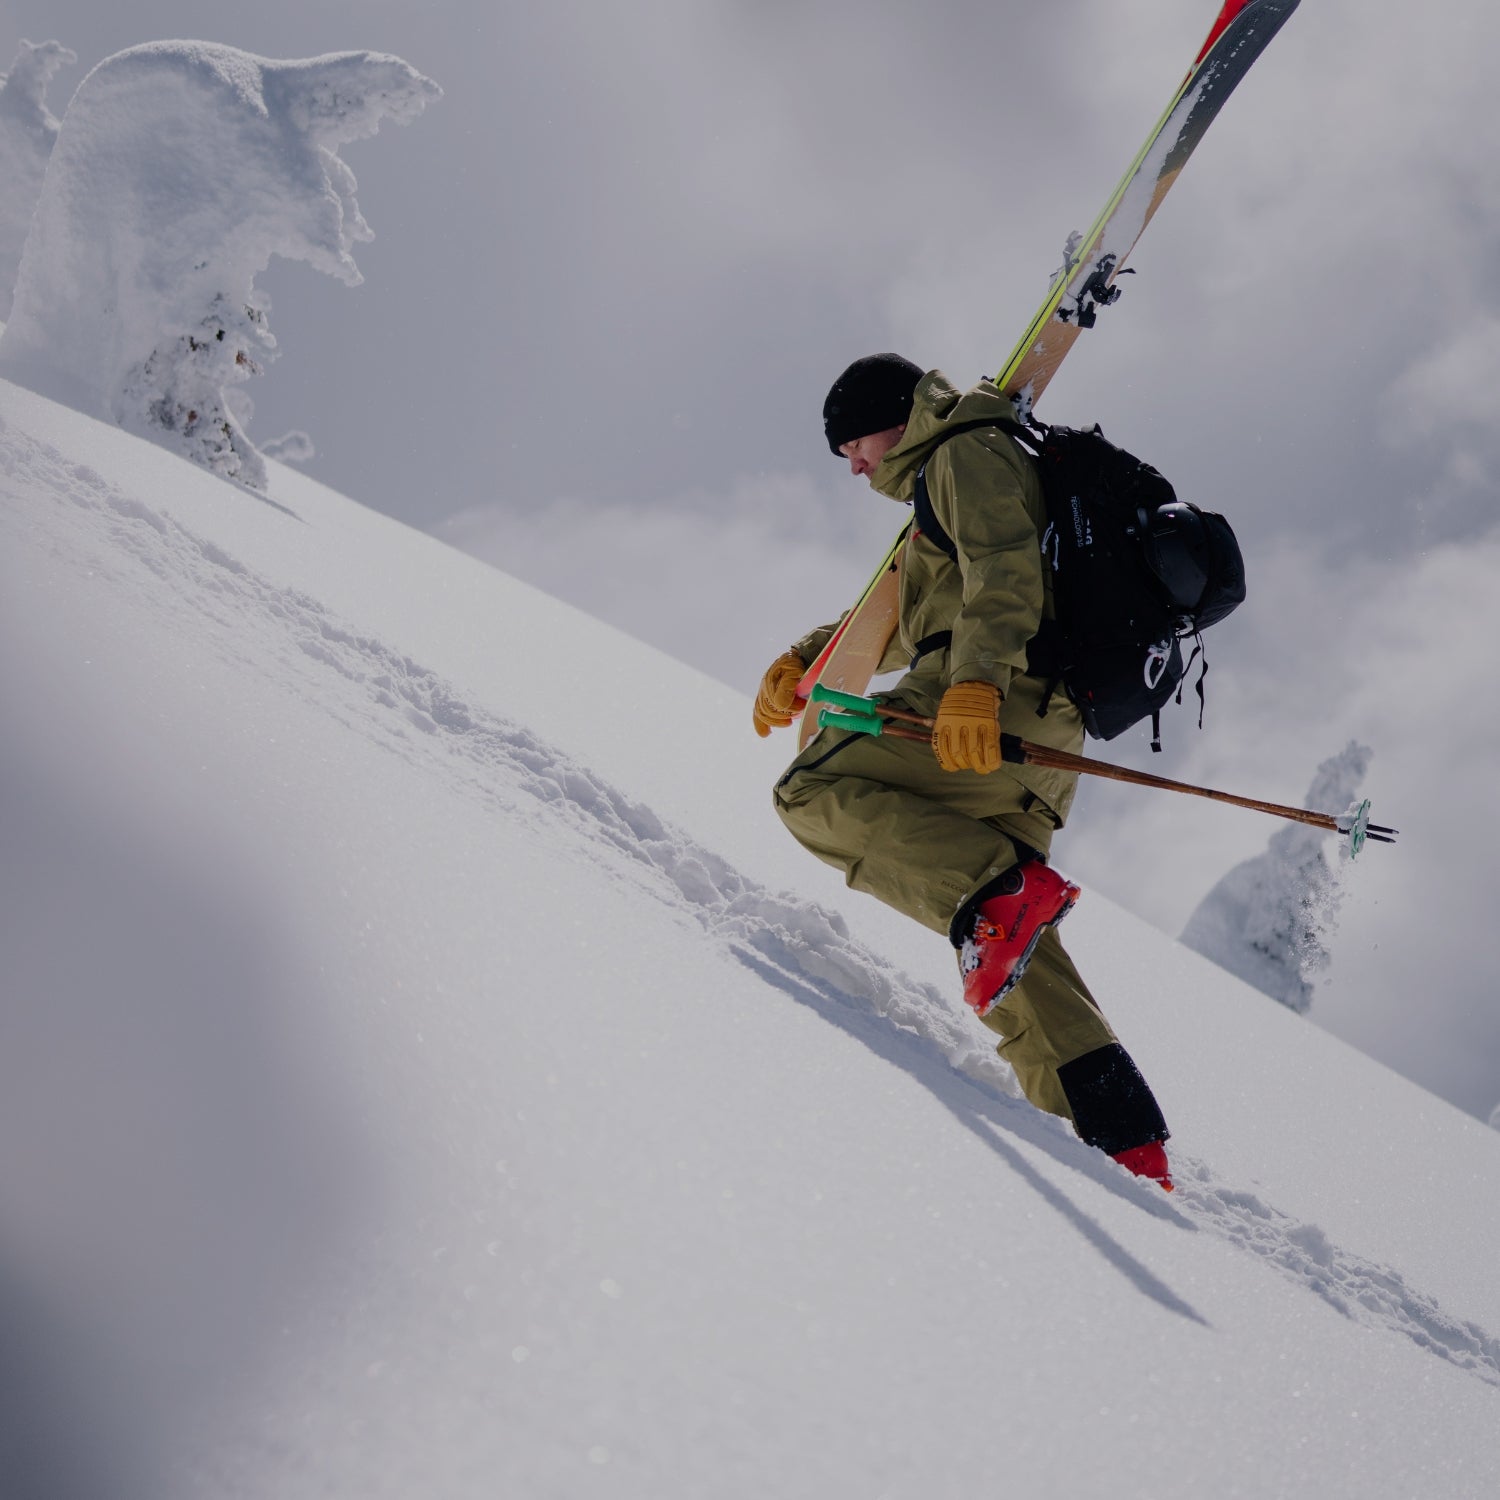 Skier with Auclair gloves climbing a pristine snowy slope, preparing for a backcountry descent.